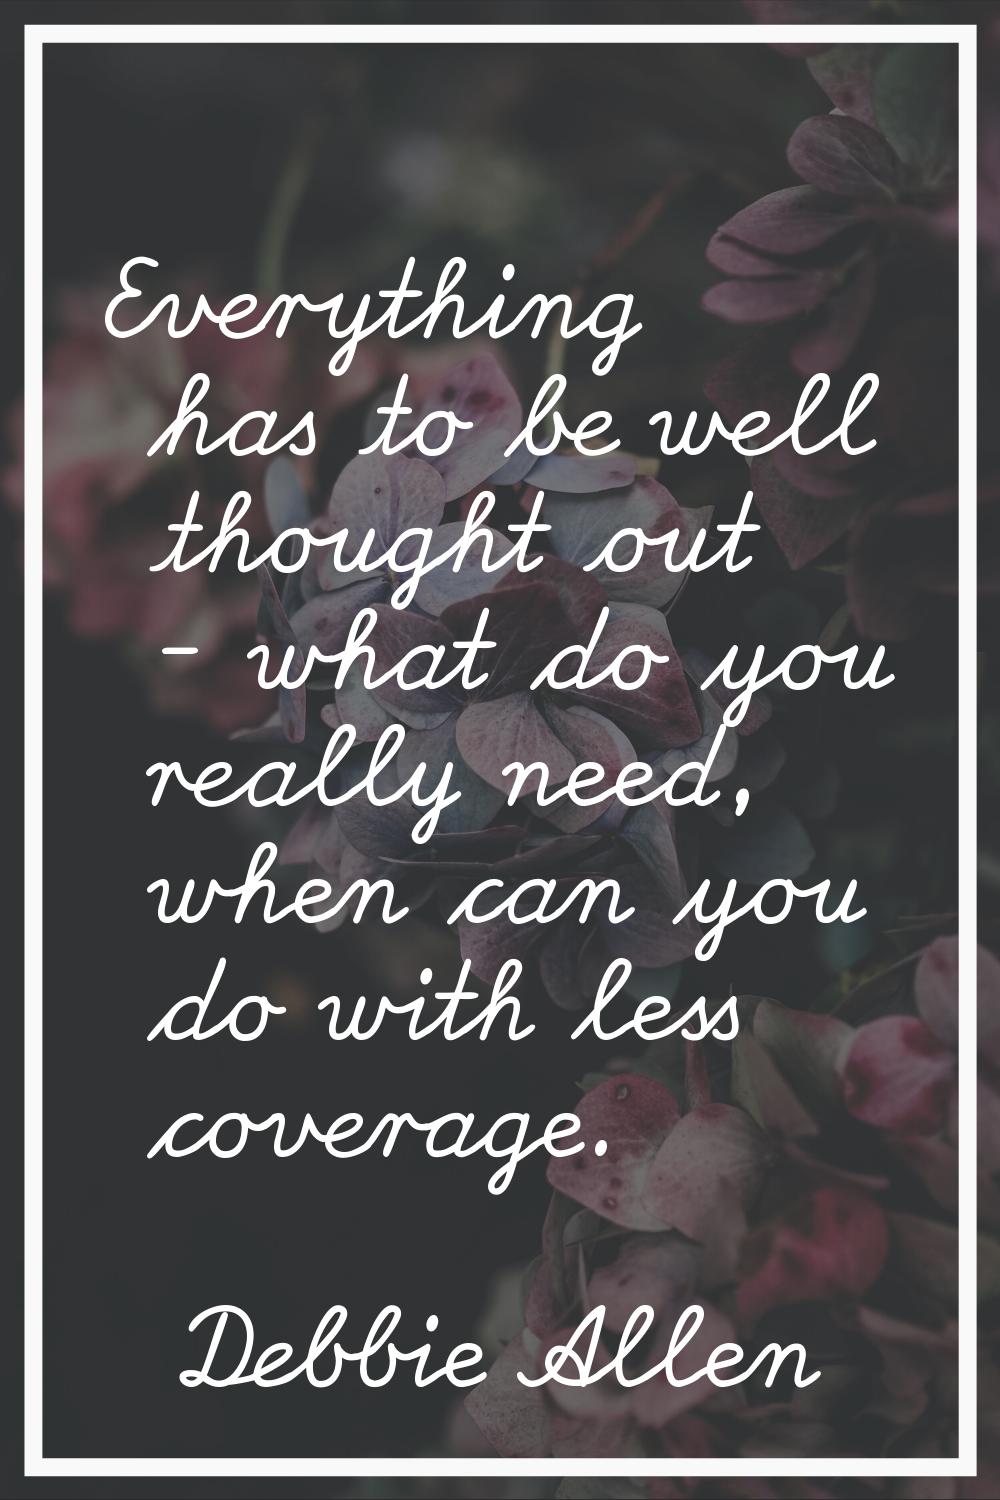 Everything has to be well thought out - what do you really need, when can you do with less coverage